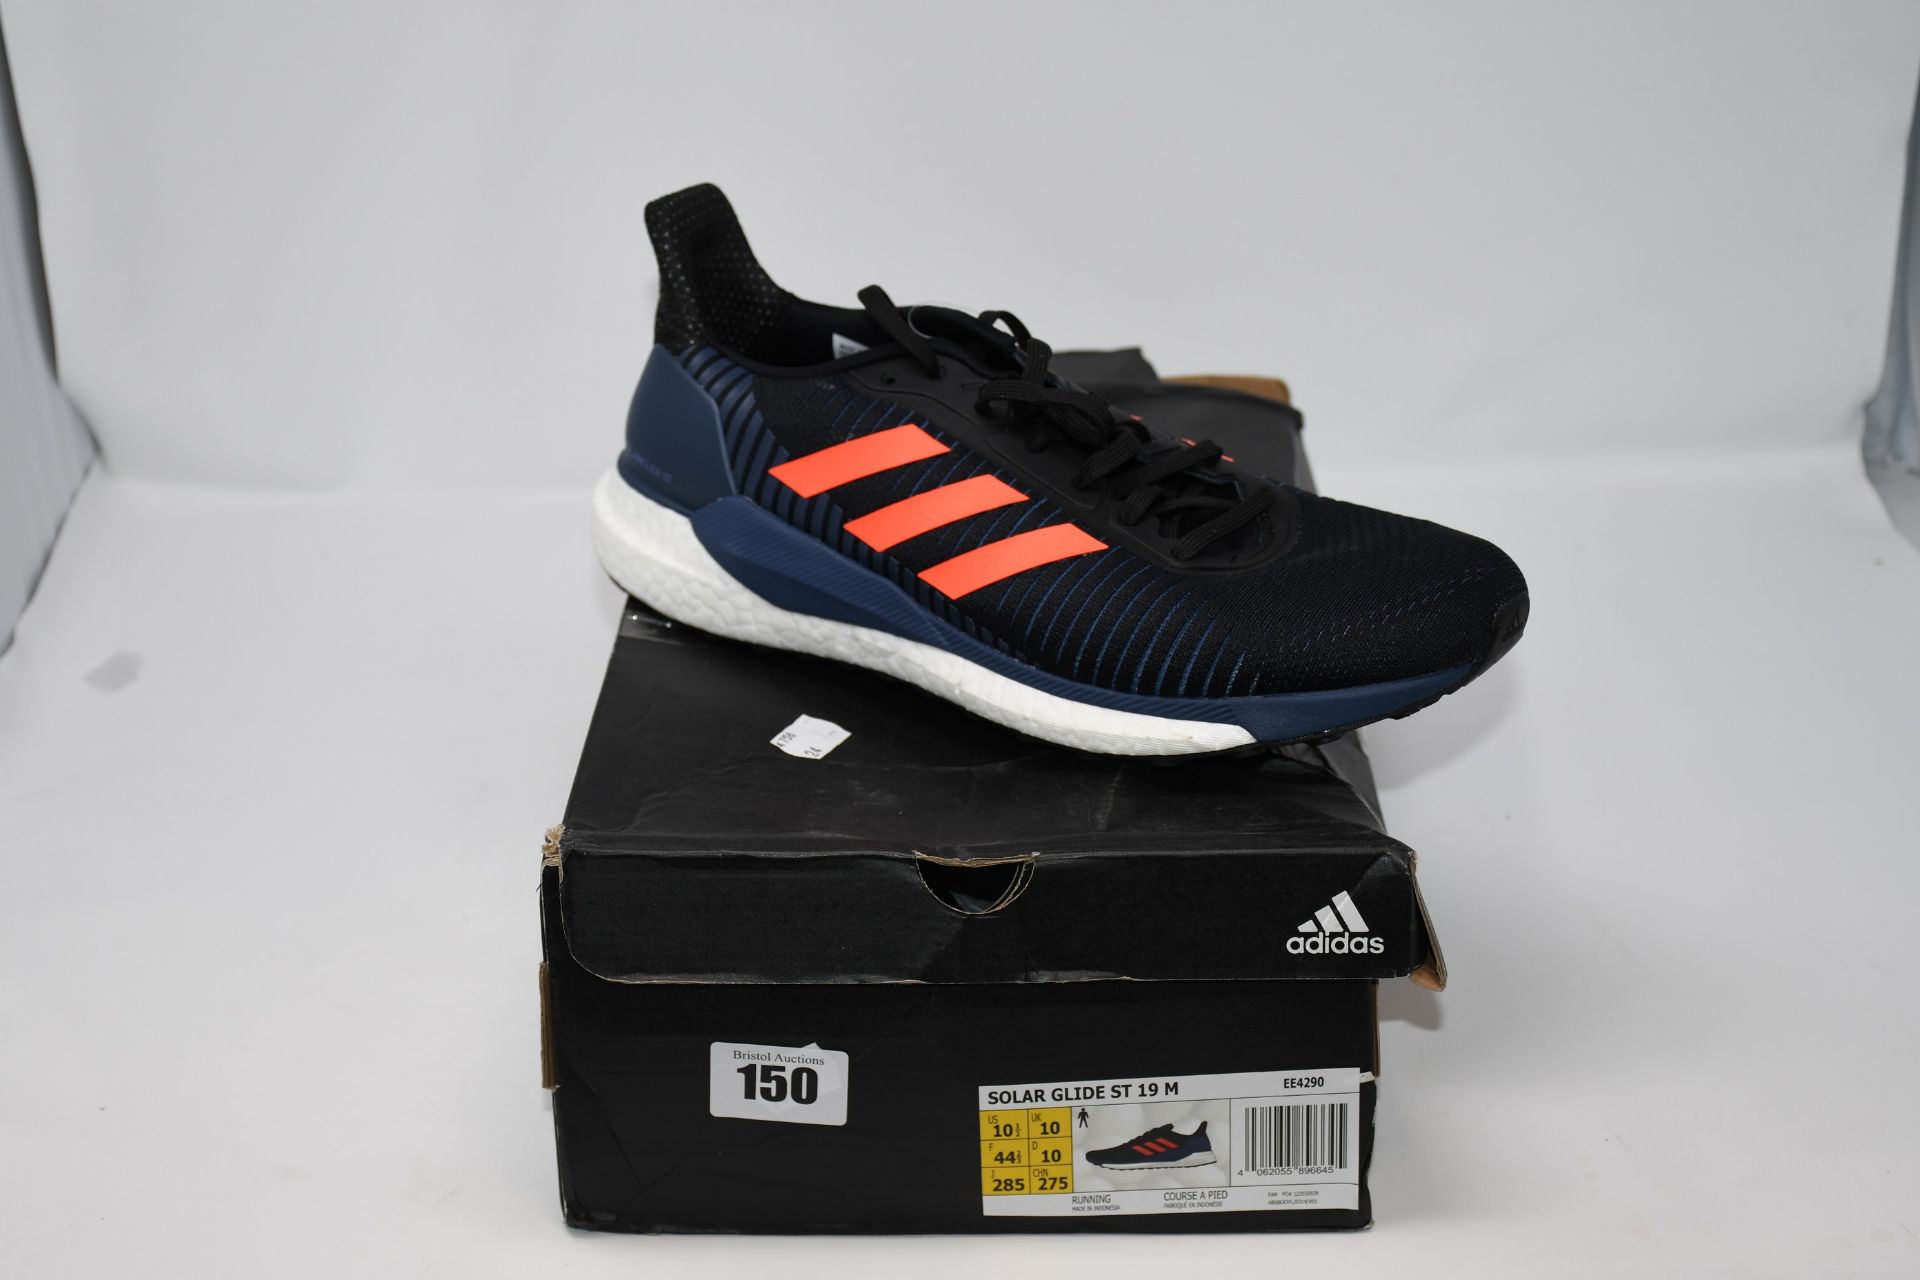 One as new Adidas Solar Glide ST 9 M trainers. Size: UK 10.